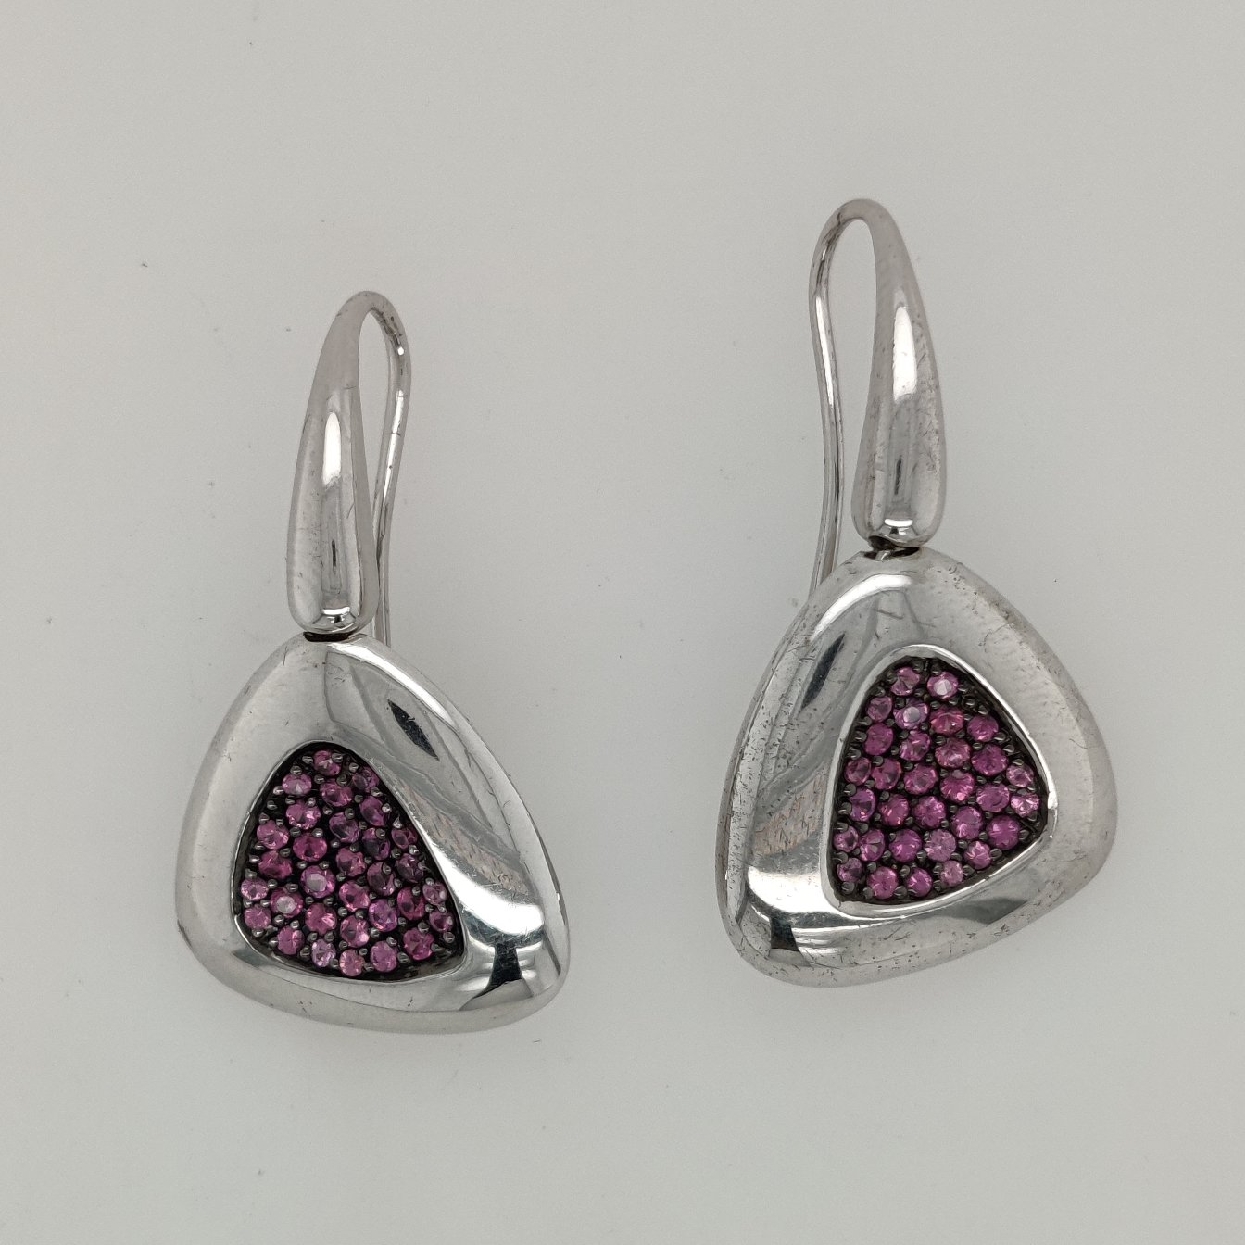 Roberto Coin Sterling Silver Capri Earrings with Pink Rhodolite